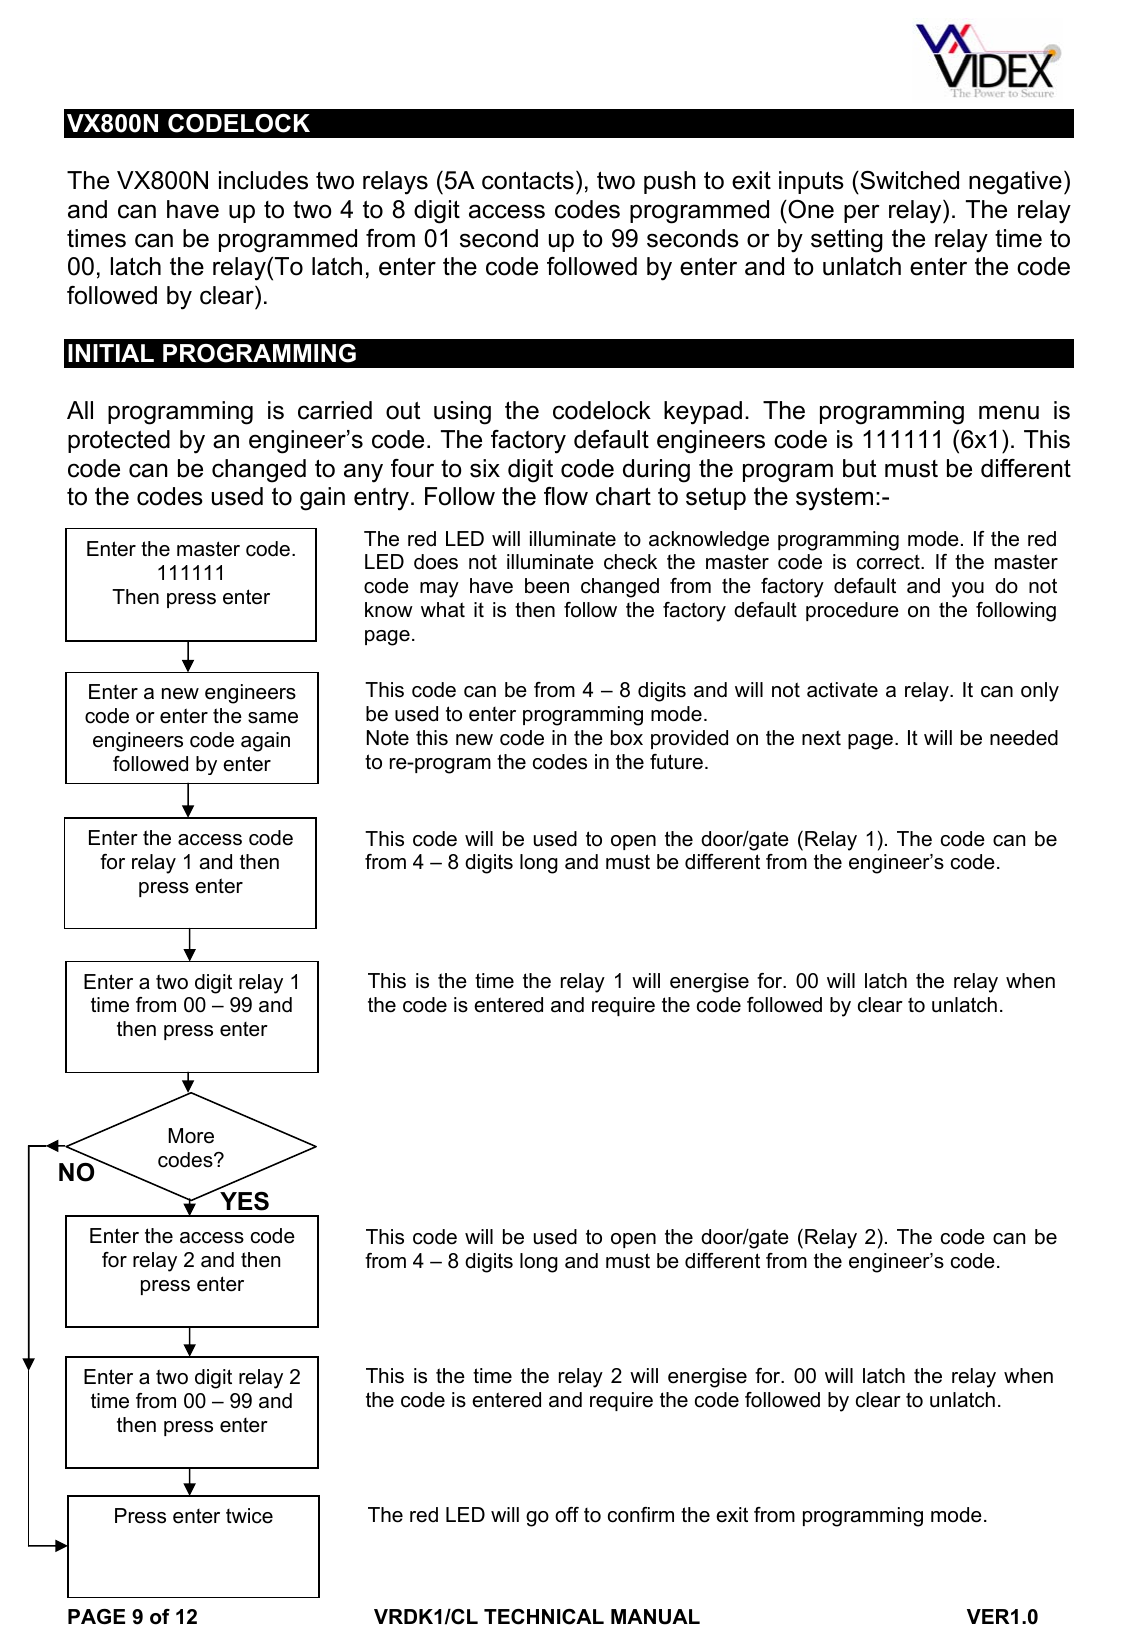 Page 9 of 12 - VRDK1CLManual Videx-VRDK1CL-Manual-with-codelock